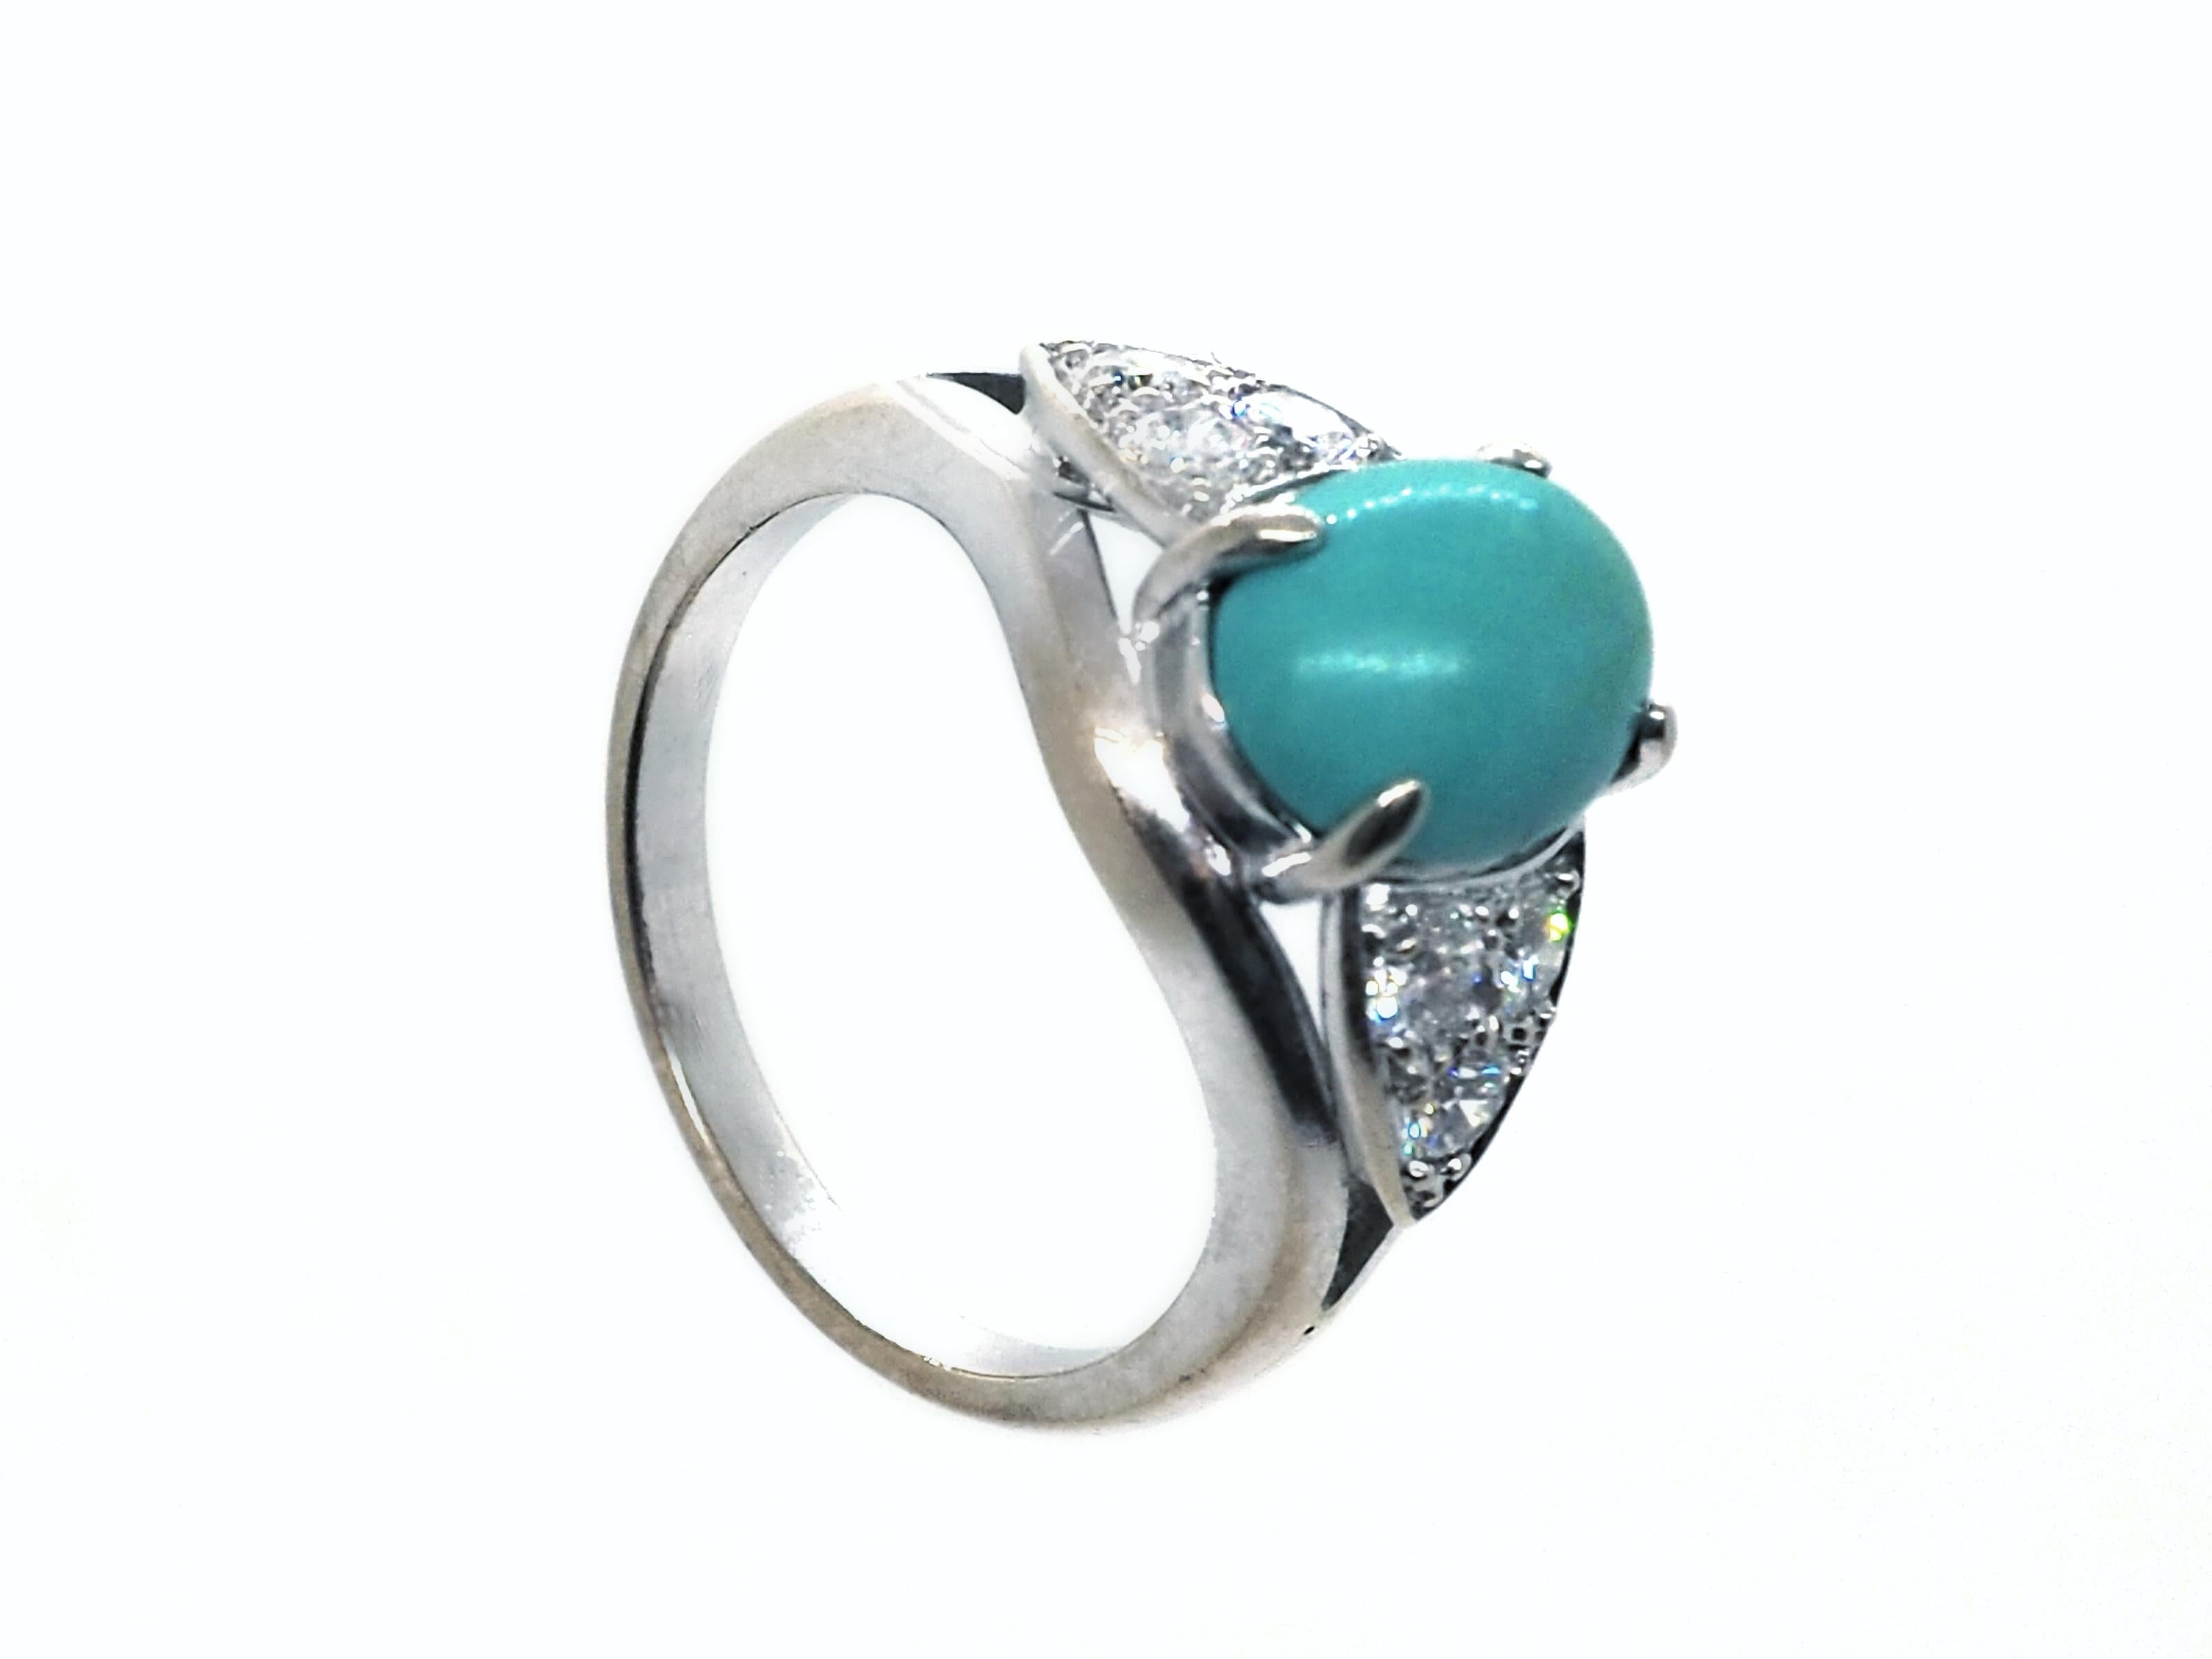 Diamond and turquoise ring crafted in 18K white gold. The ring features  an oval turquoise cabochon and 6 brilliant-cut round diamonds with an approximate weight of 0.8 carat.

Total weight: 6 grams
Eu size: 56
US size: 7.75

The ring can be resized